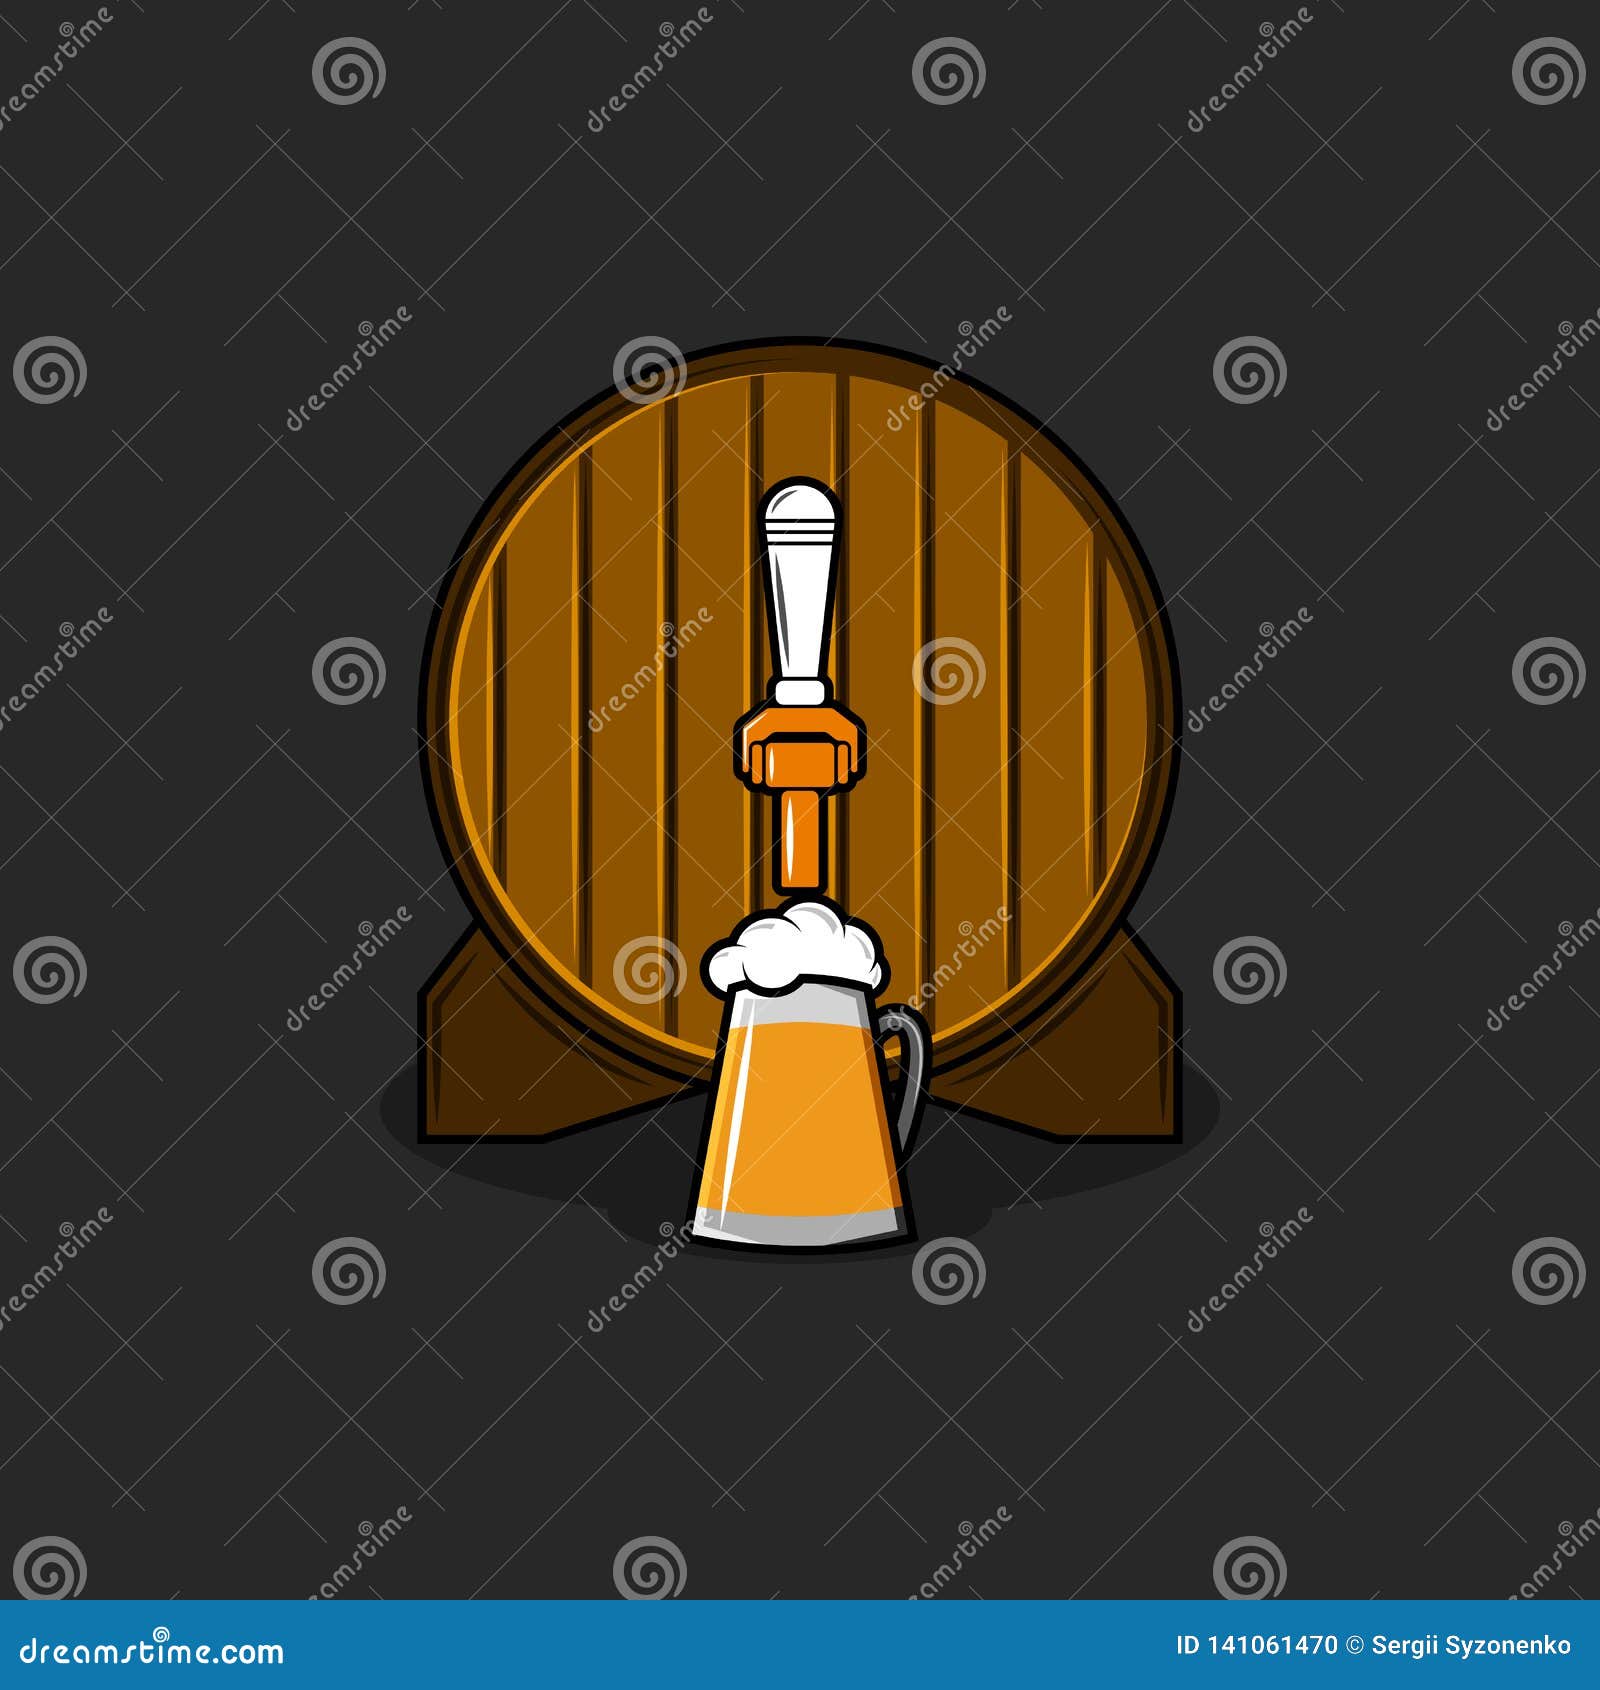 Download Brewery Logo Mockup Old Wooden Barrel With Bronze Tap And Glass Mug With Foam Of Beer Front Round Shape Keg View Isolated On Stock Vector Illustration Of Board Glass 141061470